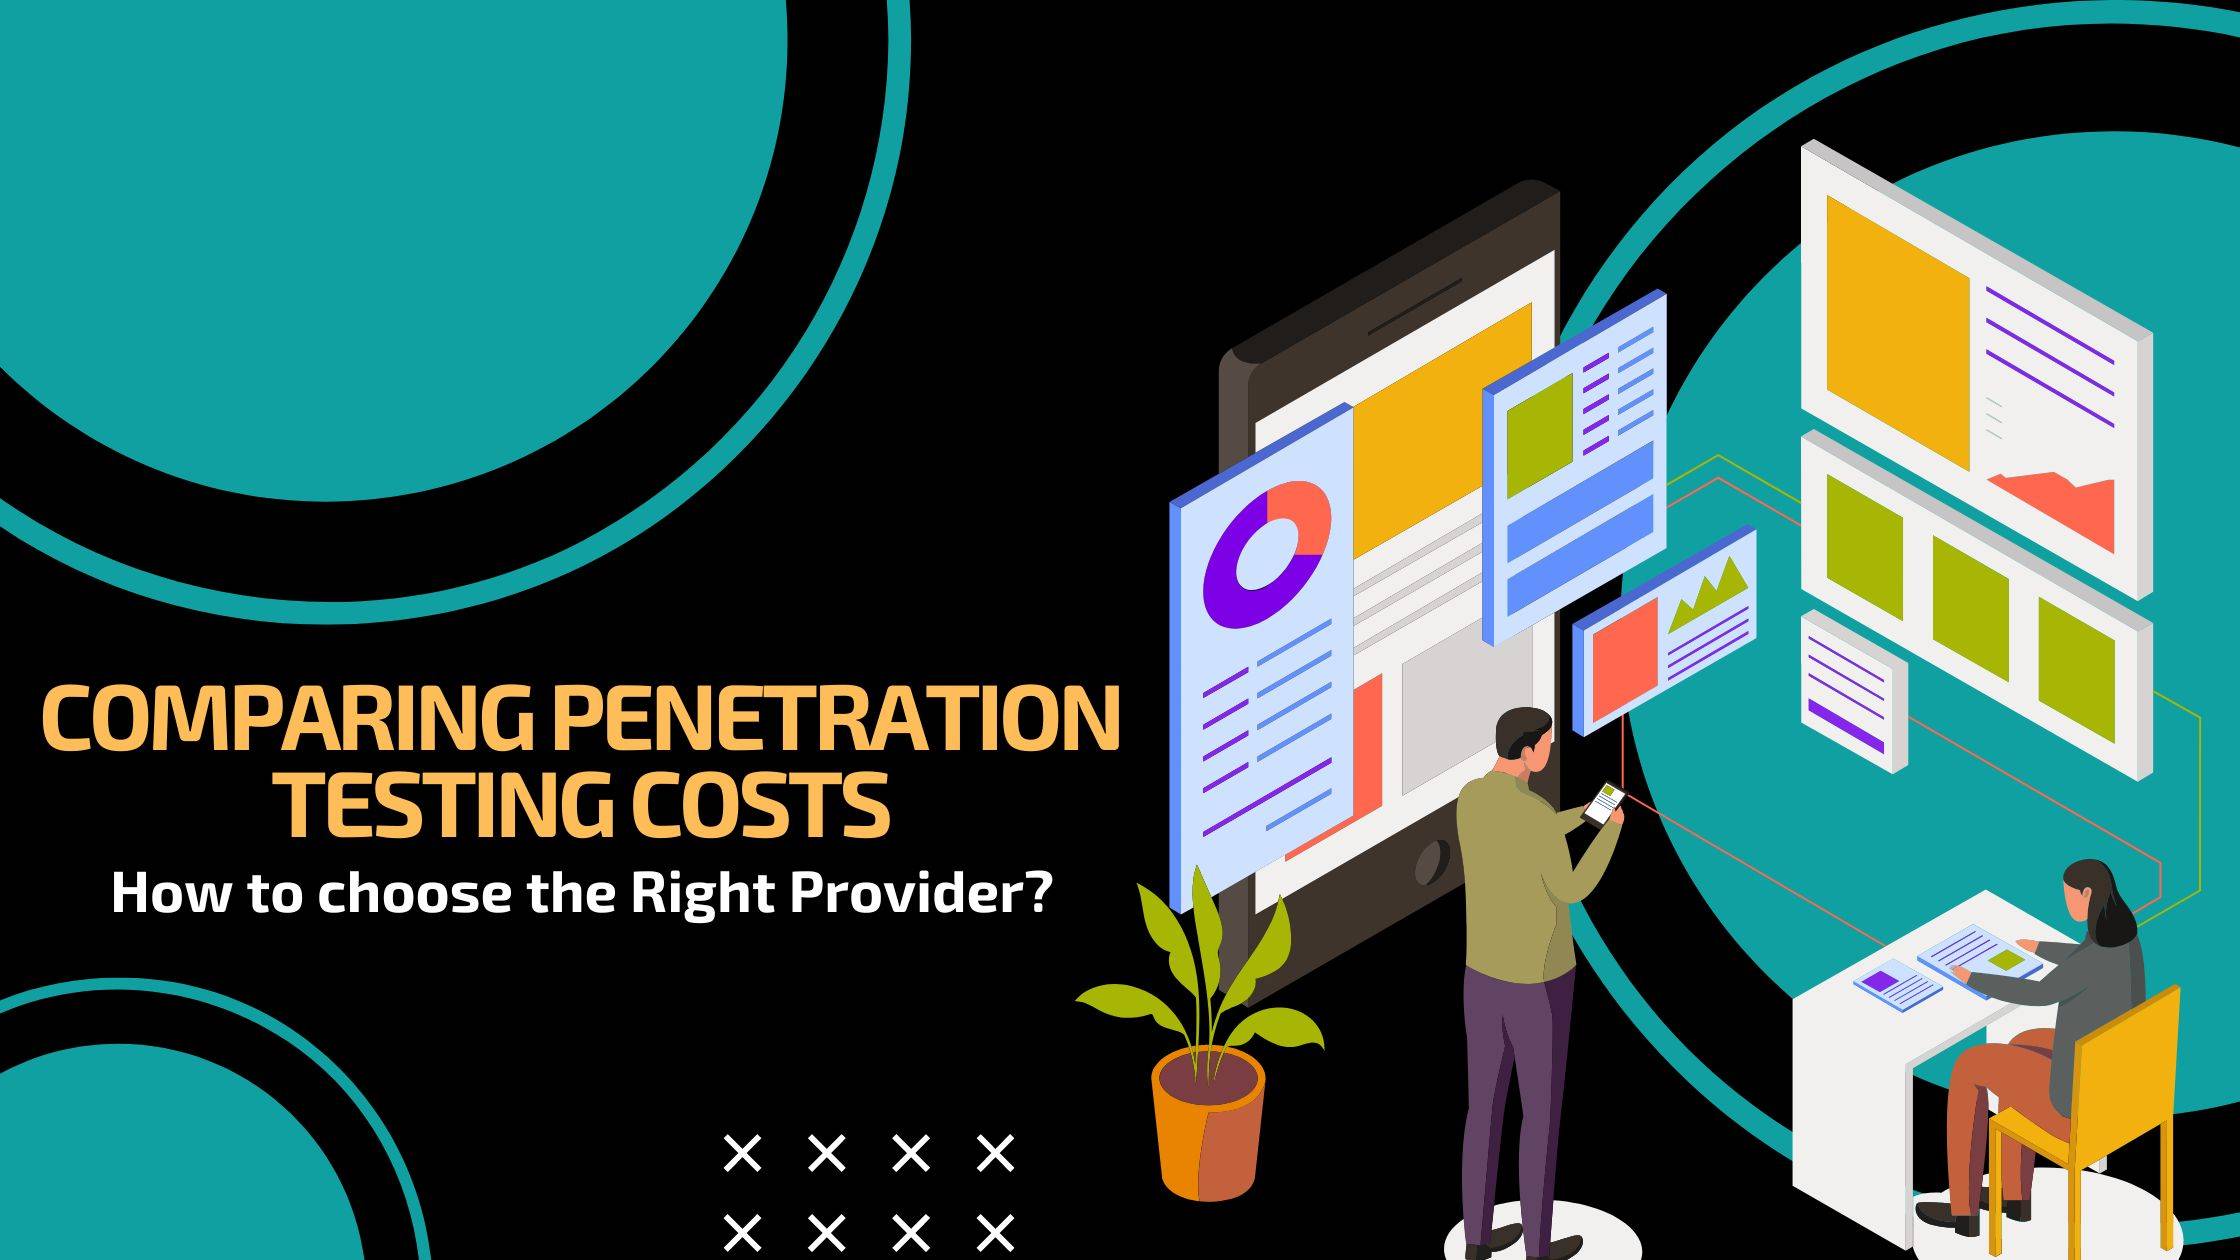 Comparing Penetration Testing Costs: How to Choose the Right Provider